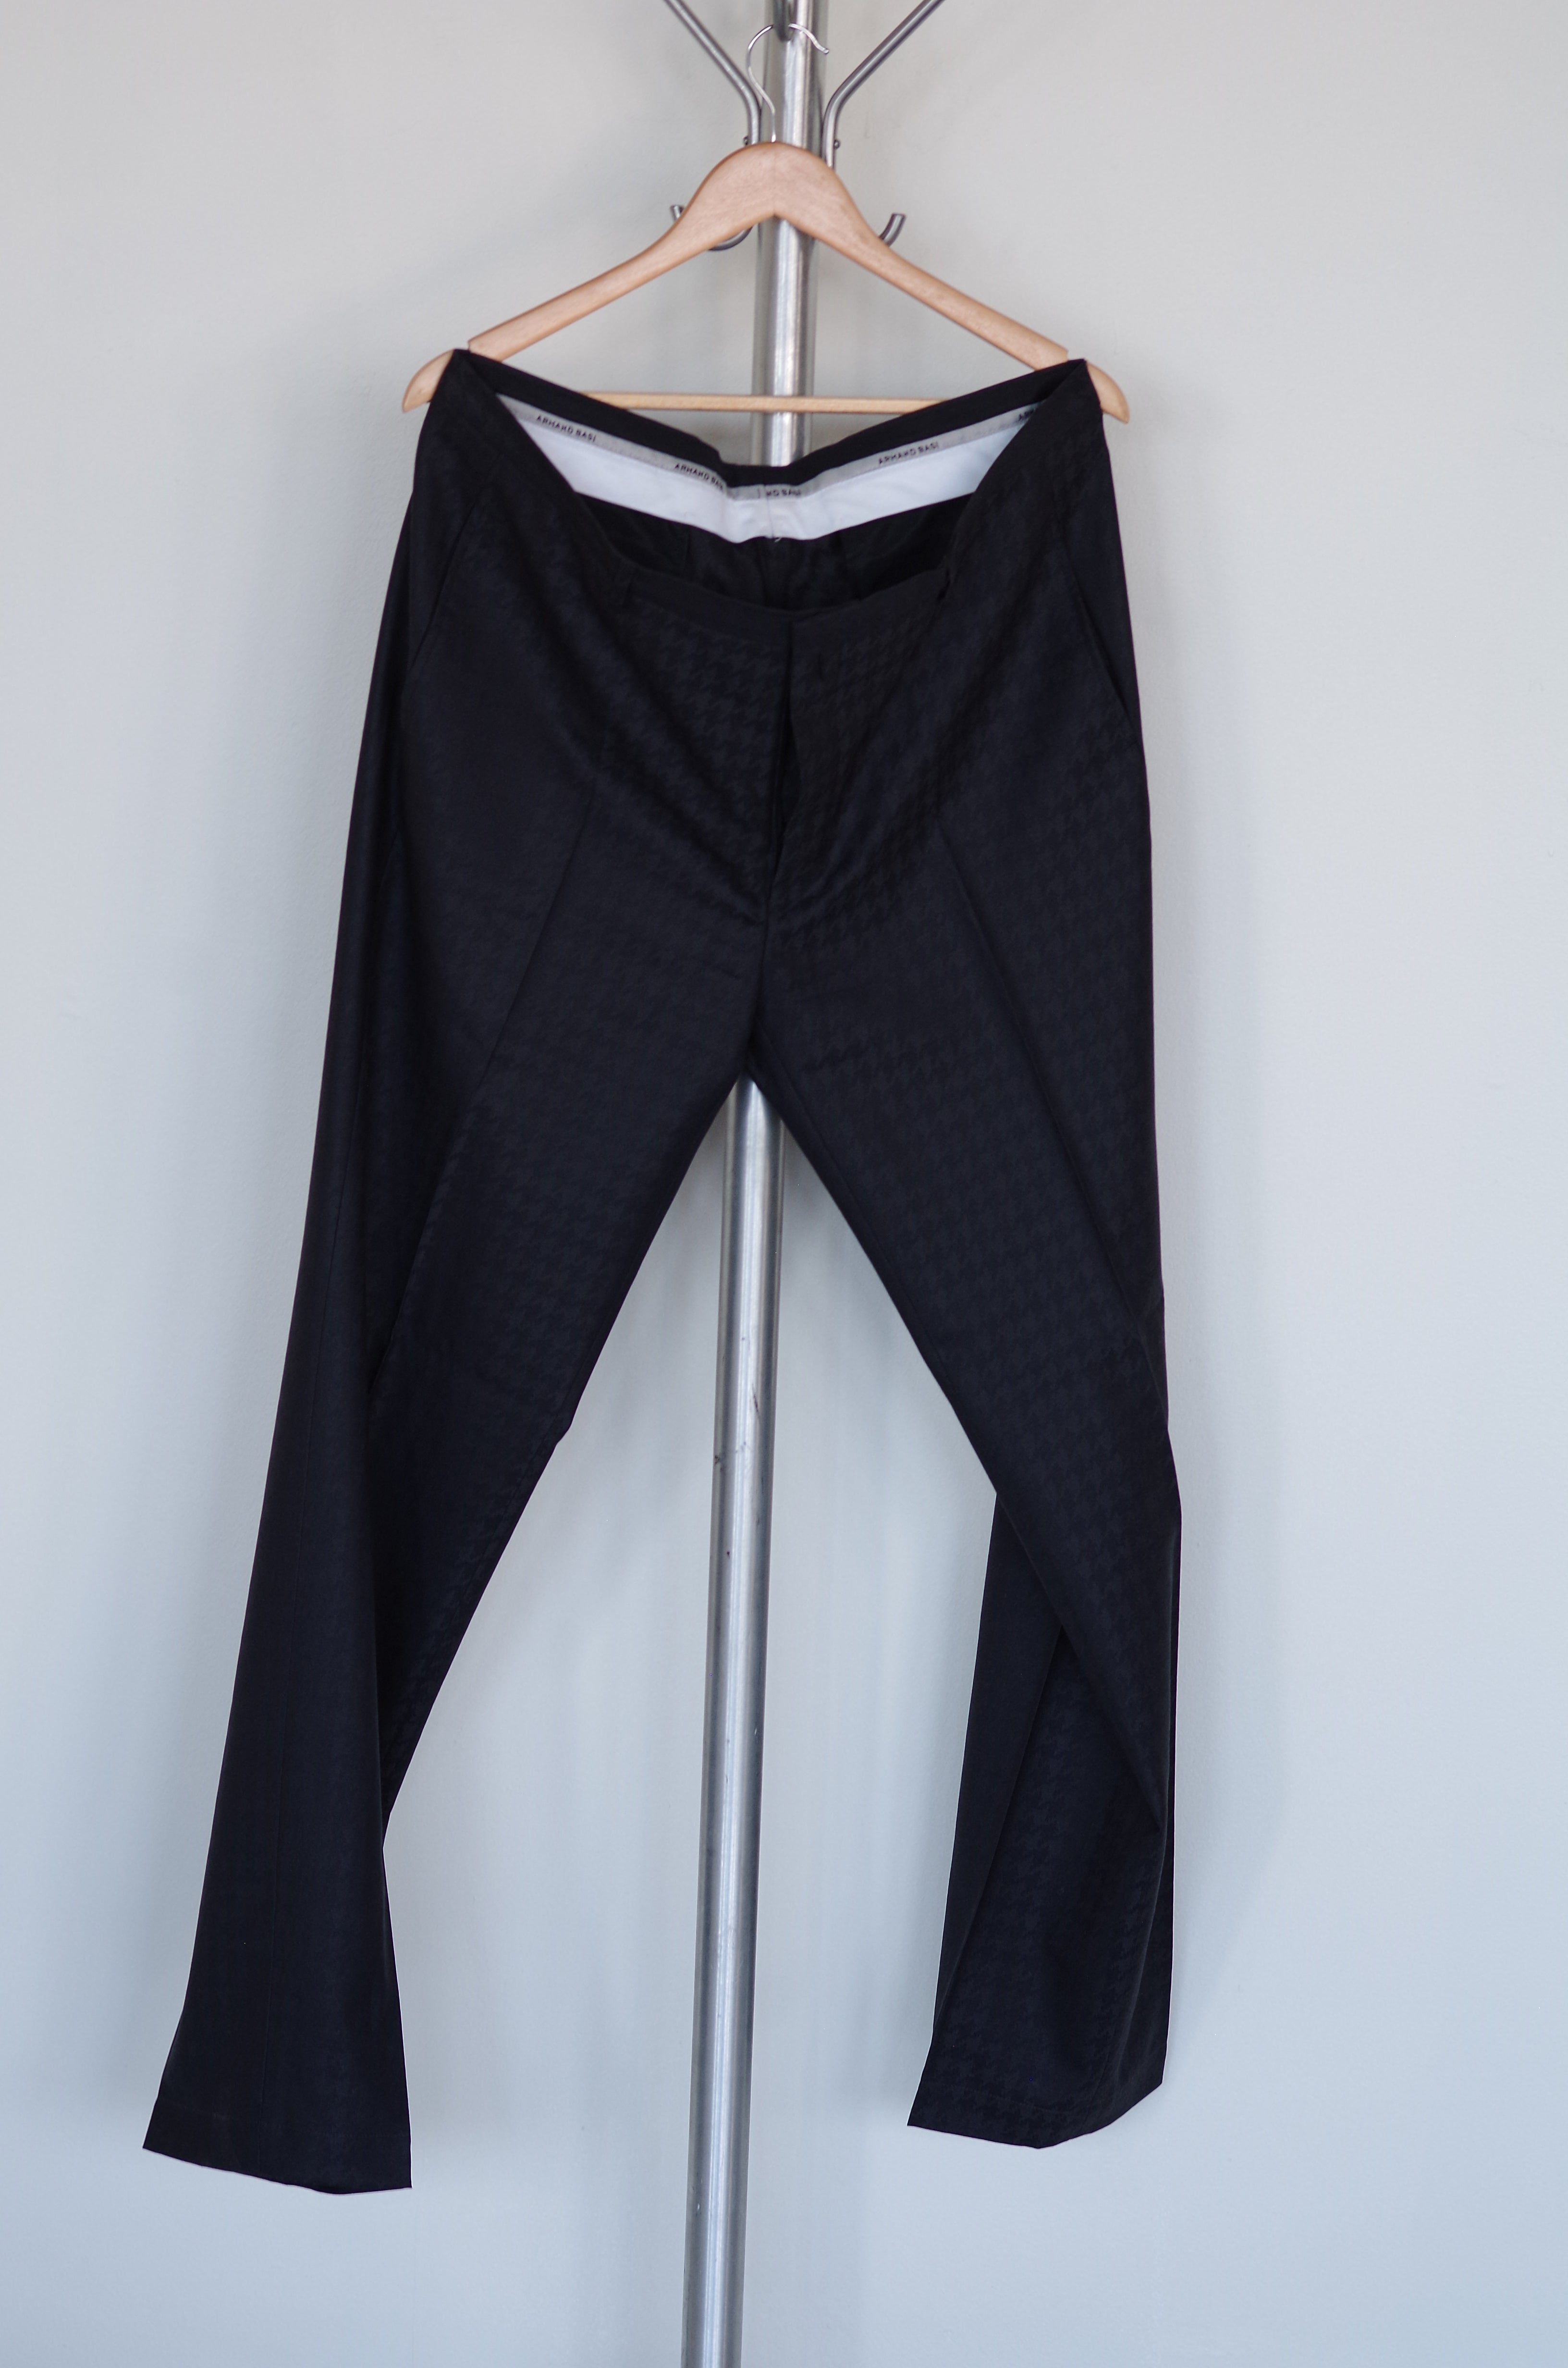 Armand Basi Exploded Houndstooth Weave Charcoal Wool Trousers- 38